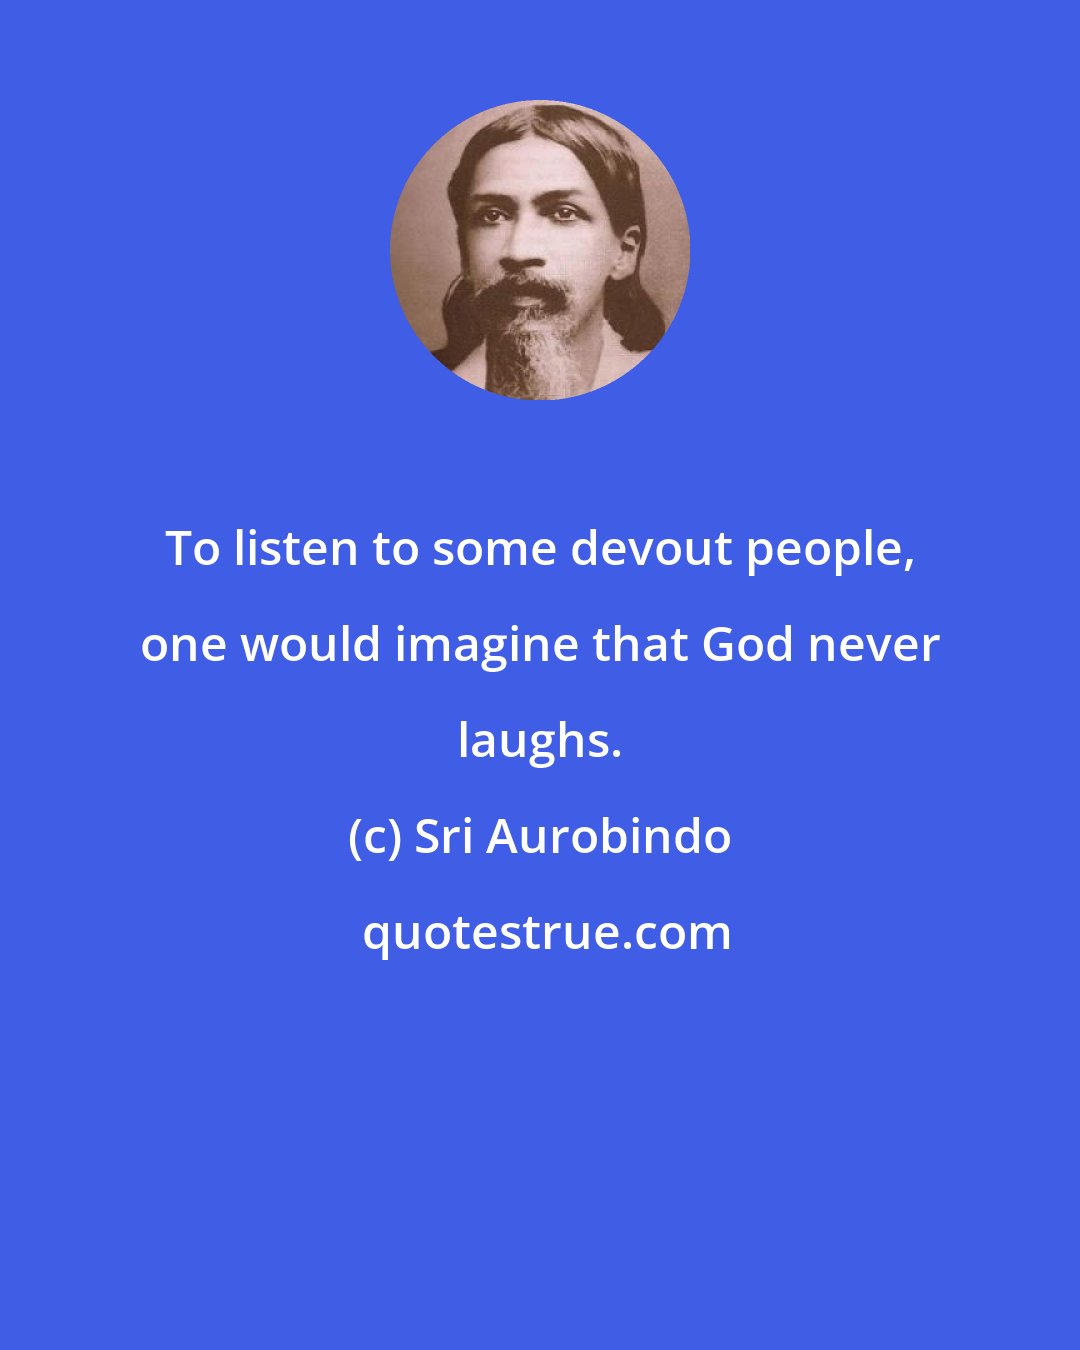 Sri Aurobindo: To listen to some devout people, one would imagine that God never laughs.